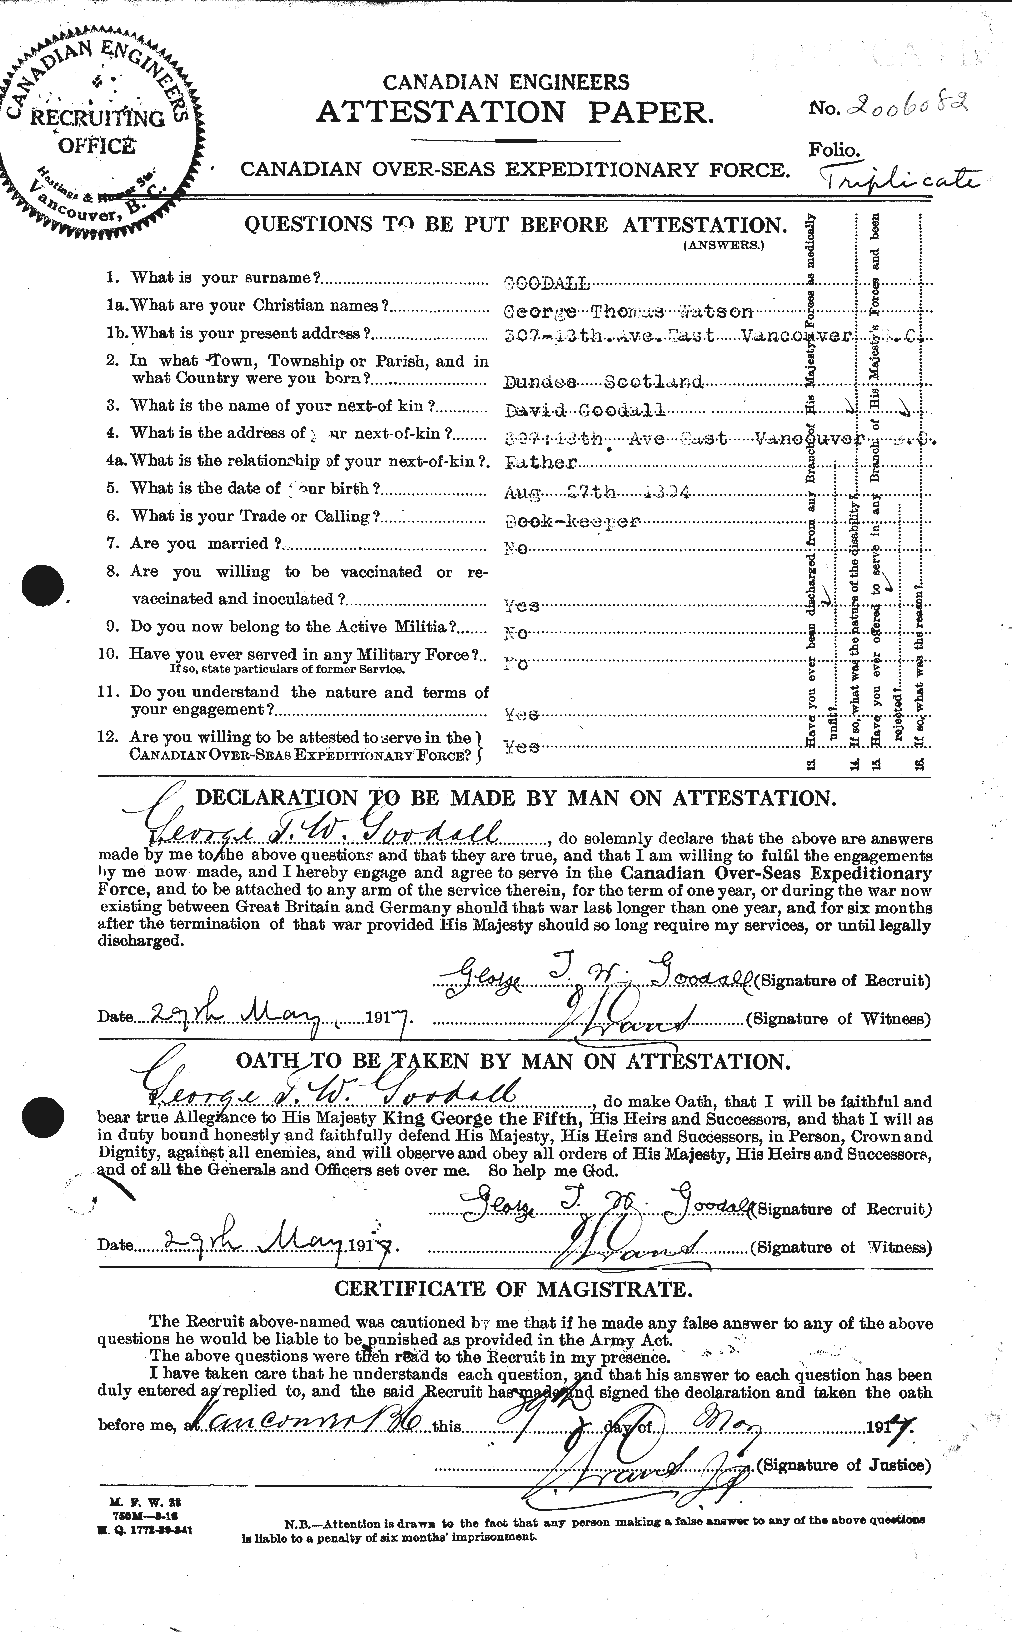 Personnel Records of the First World War - CEF 353247a